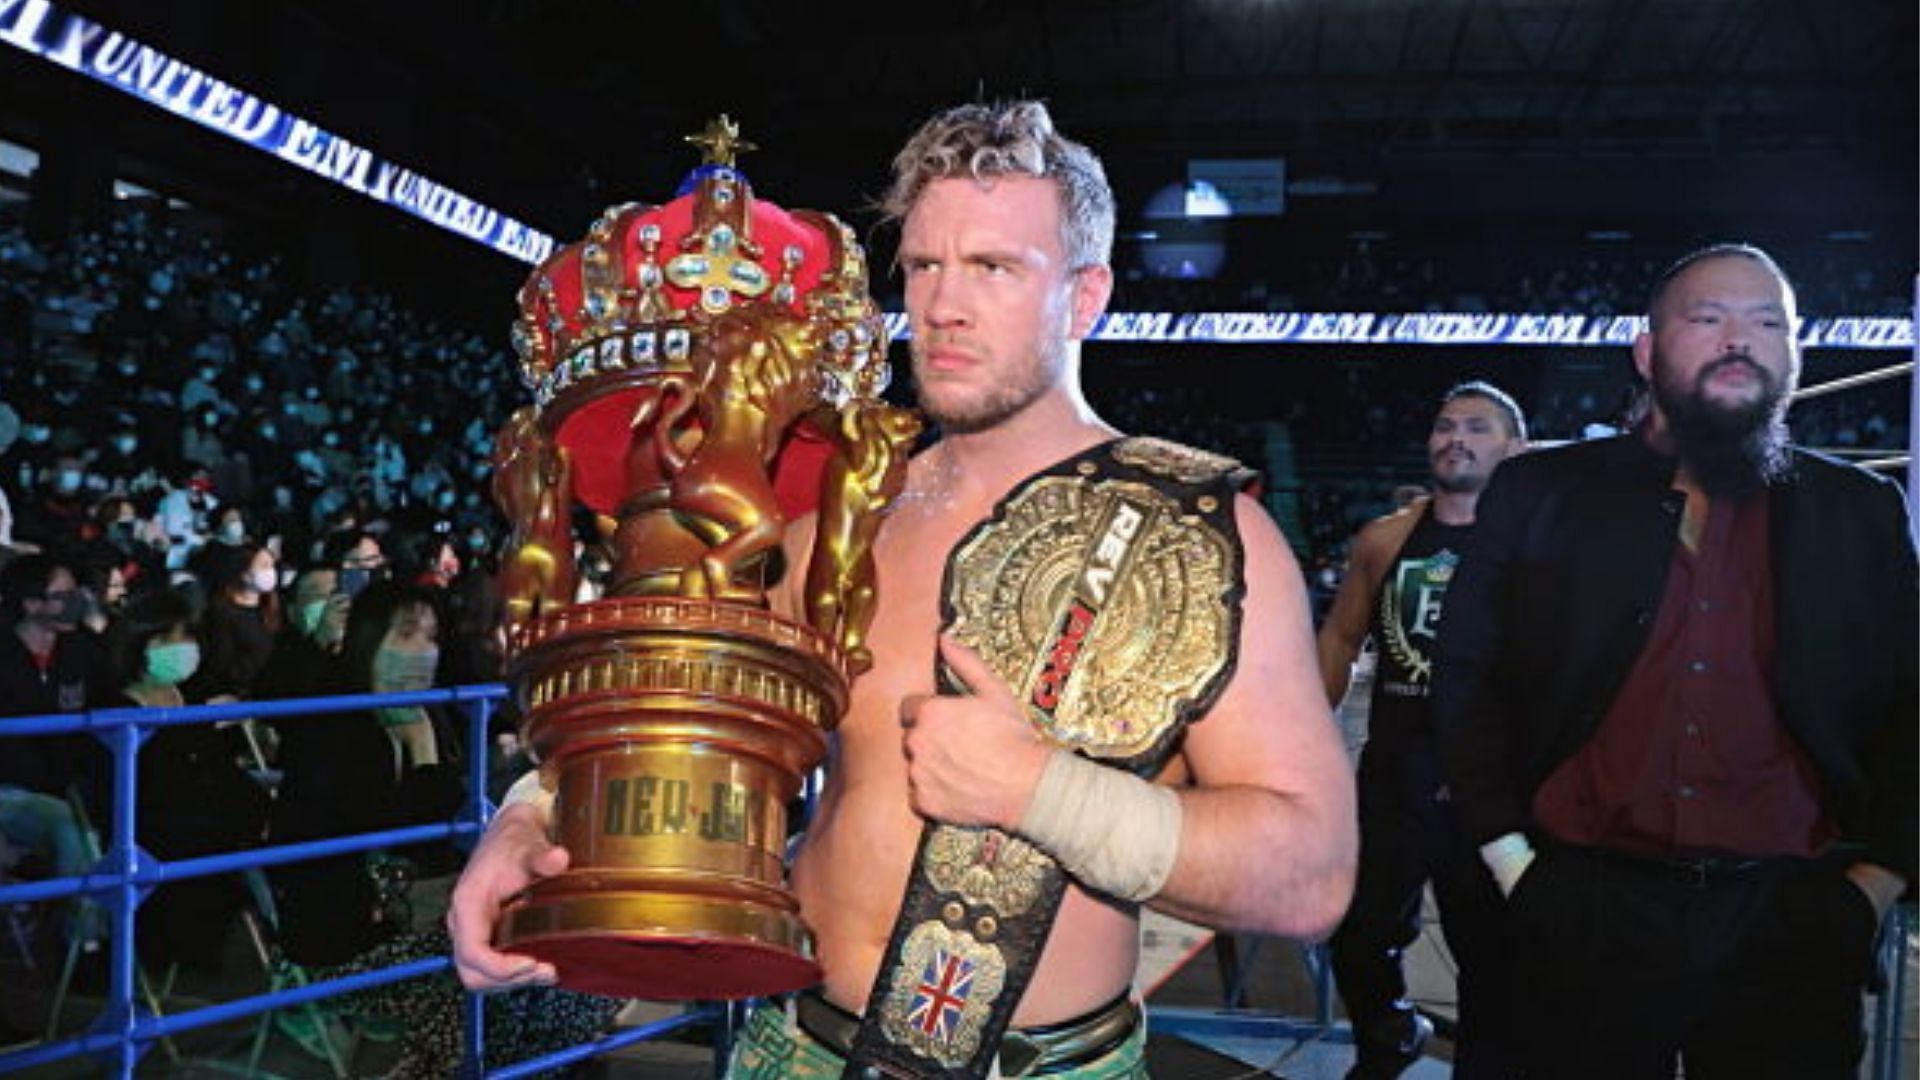 Will Ospreay is a former IWGP World Heavyweight Champion